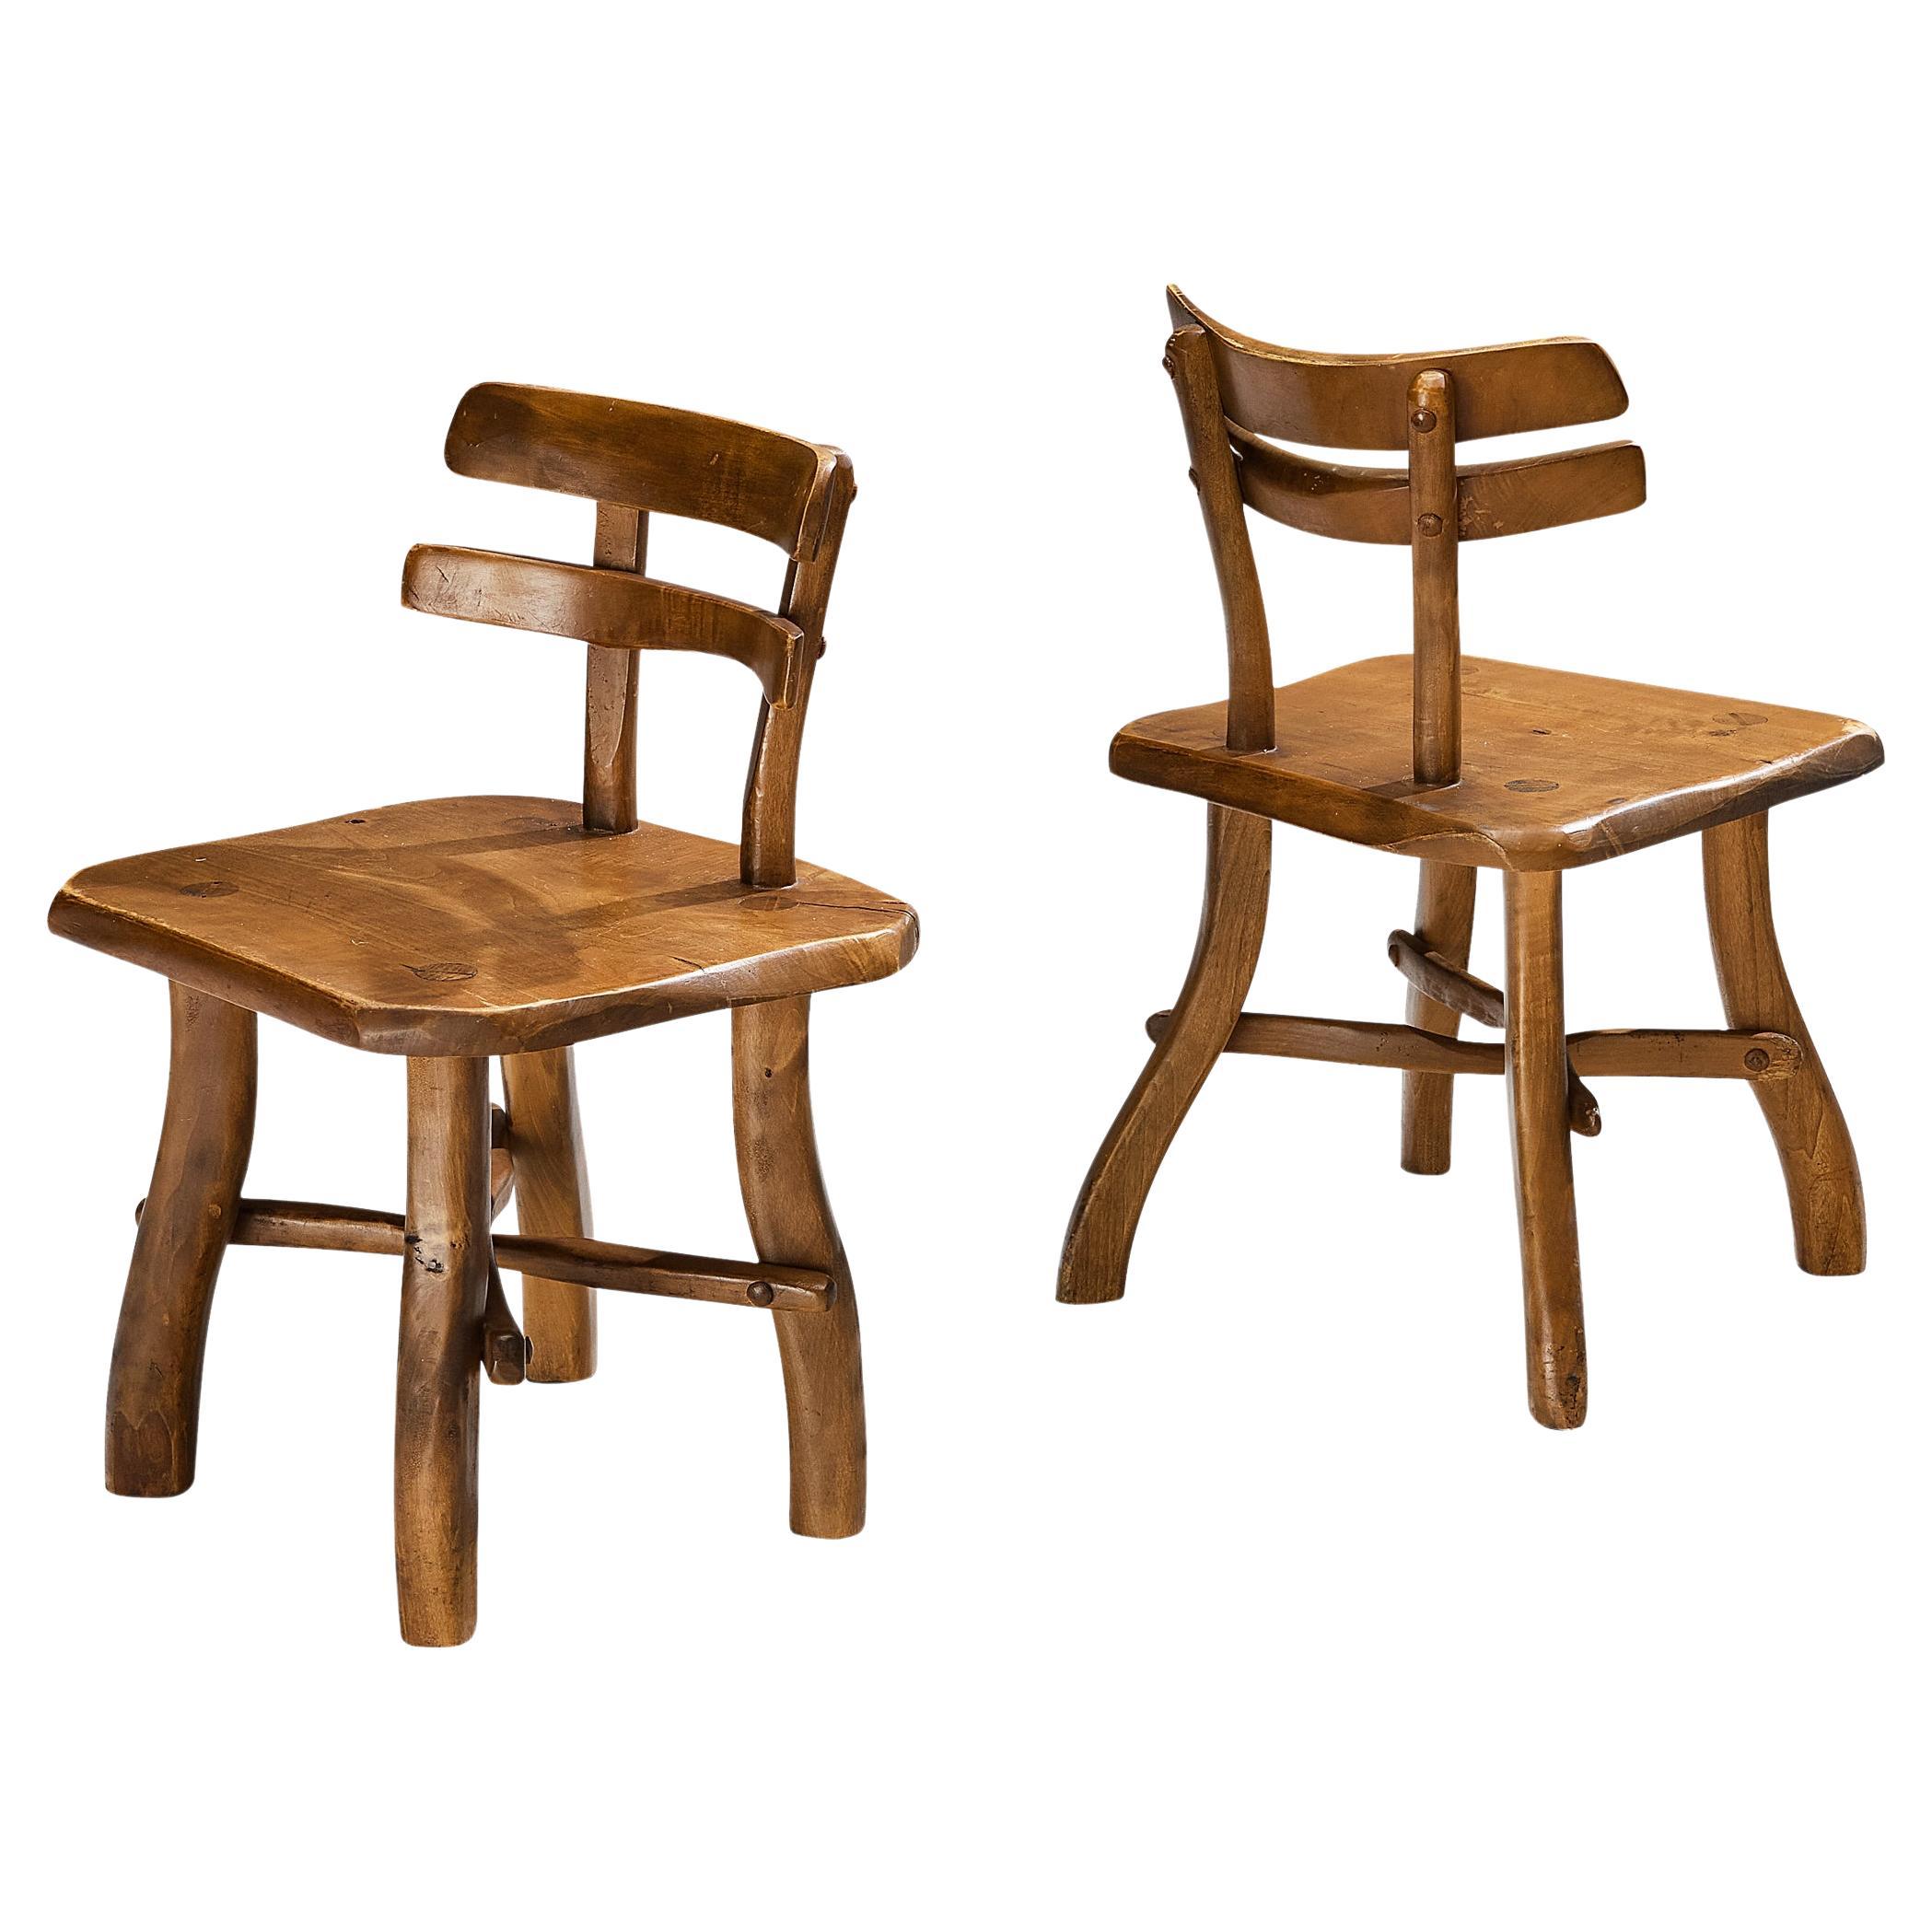 Organic Brutalist Chairs with Decorative Double Backrests in Maple For Sale